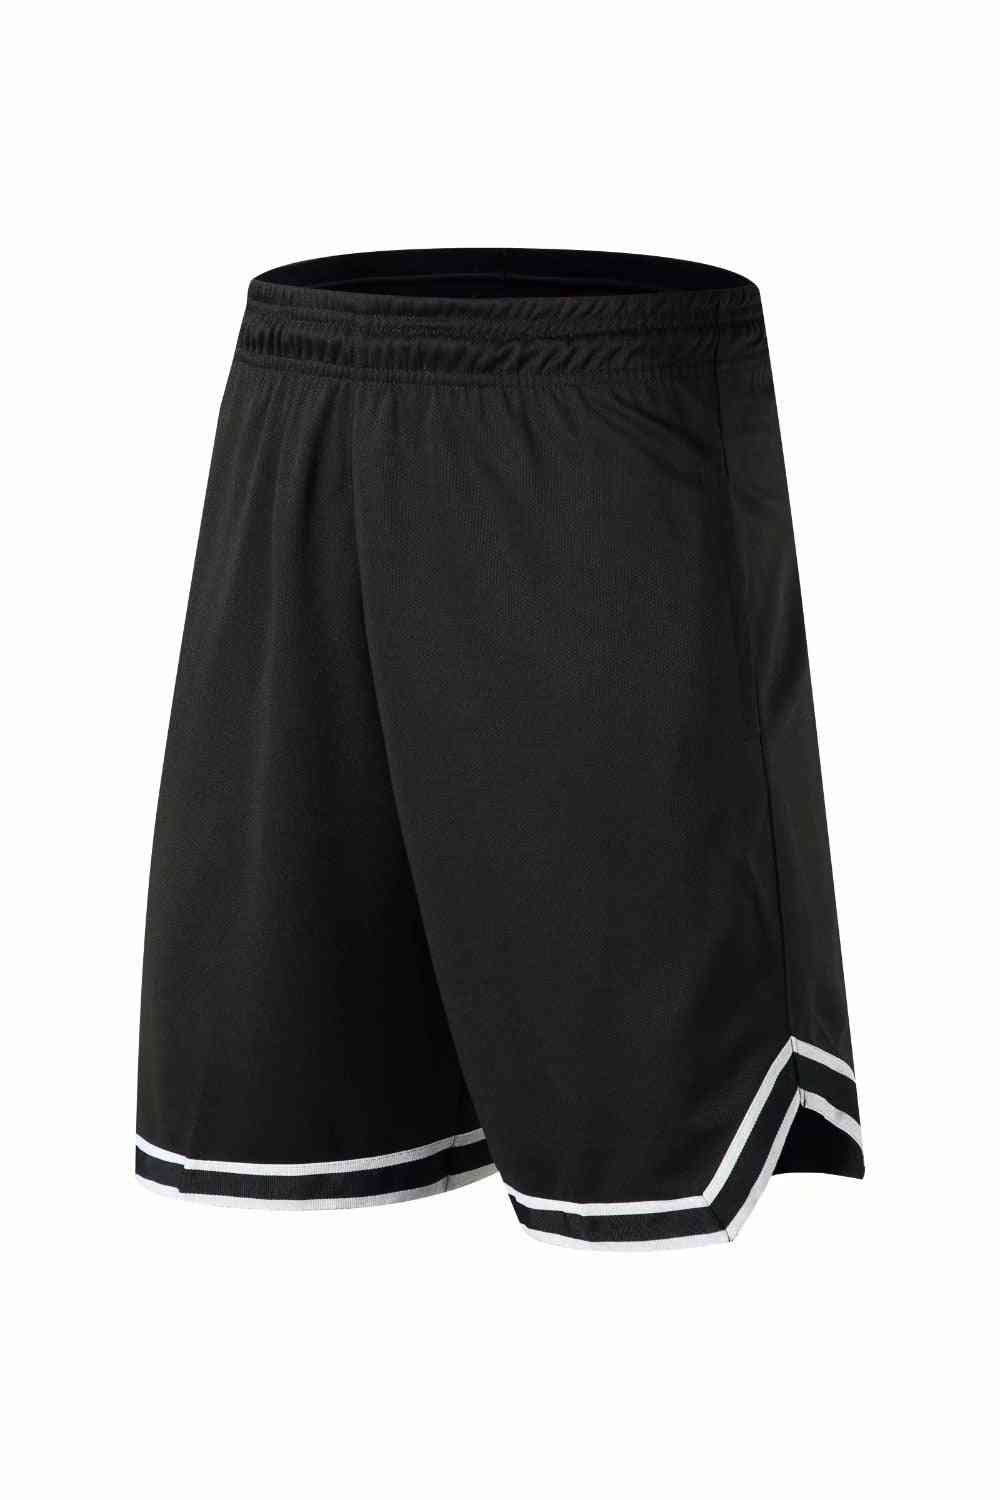 Basketball Shorts, Breathable Sweat Sport Running, Outdoor Fitness Pants Loose Beach